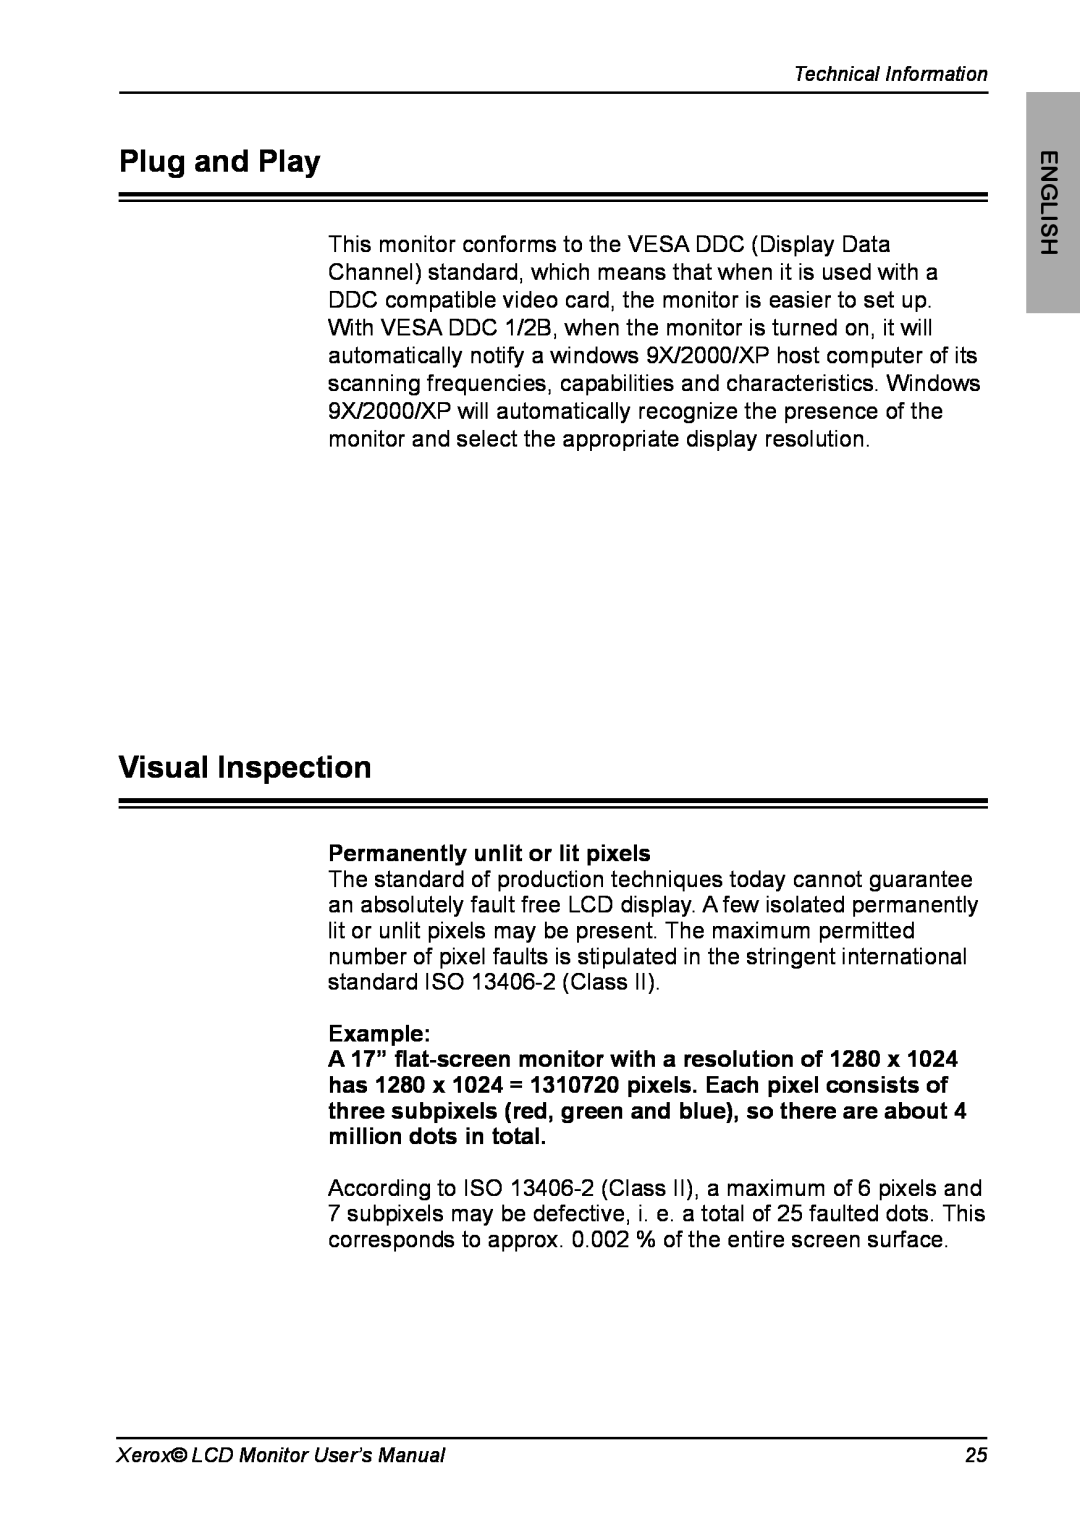 Xerox XR6 Series manual Plug and Play, Visual Inspection, Permanently unlit or lit pixels, Example, English 